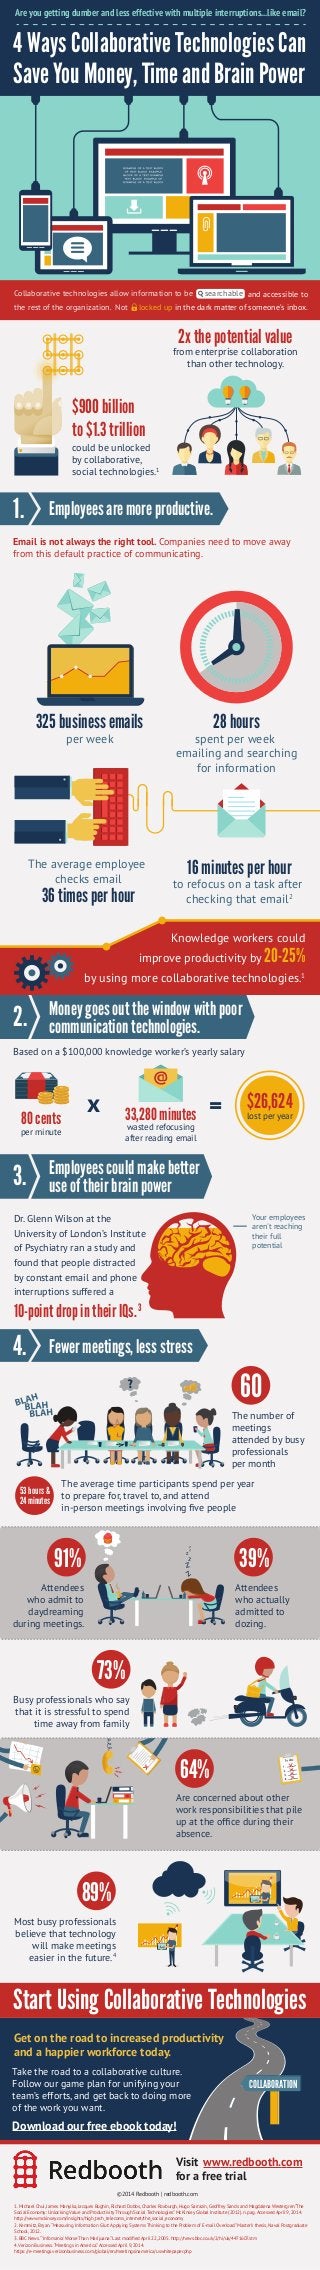 4 Ways Collaborative Technologies Can
Save You Money, Time and Brain Power
Are you getting dumber and less effective with multiple interruptions...like email?
1.
2.
Employees are more productive.
Collaborative technologies allow information to be searchable and accessible to
the rest of the organization. Not locked up in the dark matter of someone’s inbox.
2x the potential value
from enterprise collaboration
than other technology.
could be unlocked
by collaborative,
social technologies.1
$900 billion
to $1.3 trillion
Email is not always the right tool. Companies need to move away
from this default practice of communicating.
325 business emails
per week
28 hours
spent per week
emailing and searching
for information
The average employee
checks email
36 times per hour
16 minutes per hour
to refocus on a task after
checking that email2
Knowledge workers could
improve productivity by 20-25%
by using more collaborative technologies.1
Money goes out the window with poor
communication technologies.
3. Employees could make better
use of their brain power
Based on a $100,000 knowledge worker’s yearly salary
80 cents
per minute
33,280 minutes
wasted refocusing
after reading email
$26,624
lost per year
x =
4. Fewer meetings, less stress
Your employees
aren't reaching
their full
potential
Dr. Glenn Wilson at the
University of London’s Institute
of Psychiatry ran a study and
found that people distracted
by constant email and phone
interruptions suffered a
10-point drop in their IQs.3
The average time participants spend per year
to prepare for, travel to, and attend
in-person meetings involving ﬁve people
The number of
meetings
attended by busy
professionals
per month
Busy professionals who say
that it is stressful to spend
time away from family
60
91% 39%
73%
Most busy professionals
believe that technology
will make meetings
easier in the future.4
89%
Are concerned about other
work responsibilities that pile
up at the ofﬁce during their
absence.
64%
53 hours &
24 minutes
Attendees
who admit to
daydreaming
during meetings.
Attendees
who actually
admitted to
dozing.
Get on the road to increased productivity
and a happier workforce today.
Take the road to a collaborative culture.
Follow our game plan for unifying your
team’s efforts, and get back to doing more
of the work you want.
Start Using Collaborative Technologies
COLLABORATION
z
z
z
z
z
z
Visit www.redbooth.com
for a free trial
©2014 Redbooth | redbooth.com
1. Michael Chui, James Manyika, Jacques Bughin, Richard Dobbs, Charles Roxburgh, Hugo Sarrazin, Geoffrey Sands and Magdalena Westergren“The
Social Economy: Unlocking Value and Productivity Through Social Technologies.” McKinsey Global Institute (2012). n. pag. Accessed April 9, 2014.
http://www.mckinsey.com/insights/high_tech_telecoms_internet/the_social_economy
2. Kemmitz, Bryan.“Measuring Information Glut: Applying Systems Thinking to the Problem of E-mail Overload.” Master’s thesis, Naval Postgraduate
School, 2012.
3. BBC News.“'Infomania' Worse Than Marijuana.” Last modiﬁed April 22, 2005. http://news.bbc.co.uk/2/hi/uk/4471607.stm
4. Verizon Business.“Meetings in America.” Accessed April 9, 2014.
https://e-meetings.verizonbusiness.com/global/en/meetingsinamerica/uswhitepaper.php
Download our free ebook today!
 